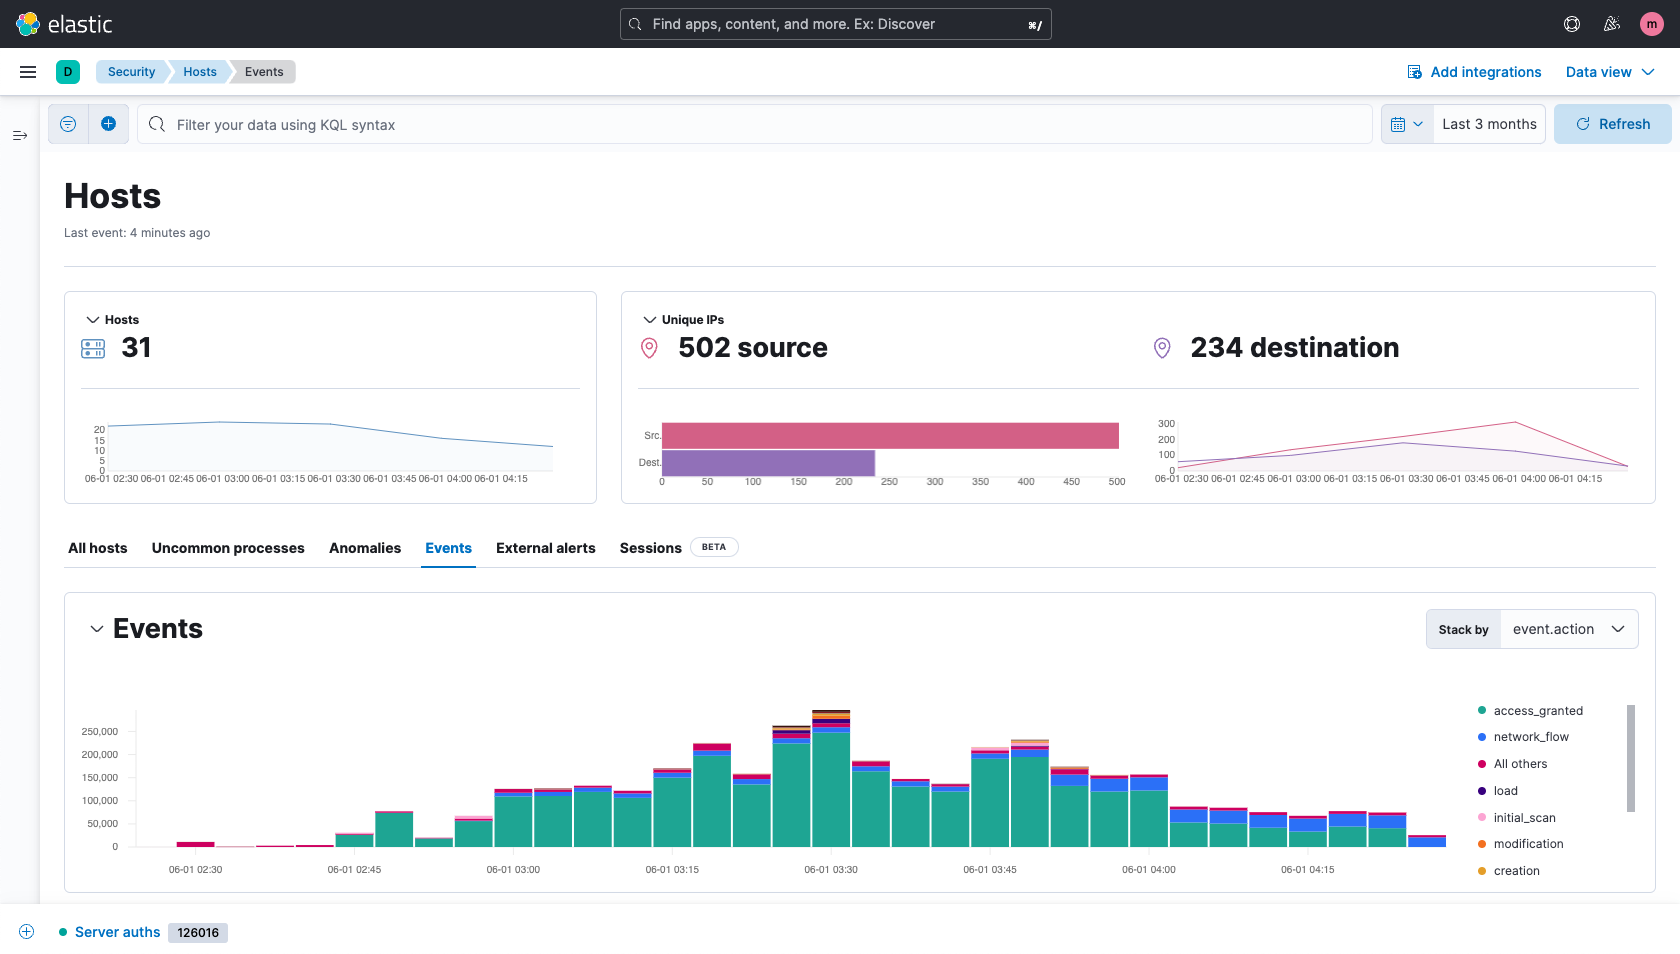 Hosts view in Elastic Security, for visualizing cloud and host infrastructure